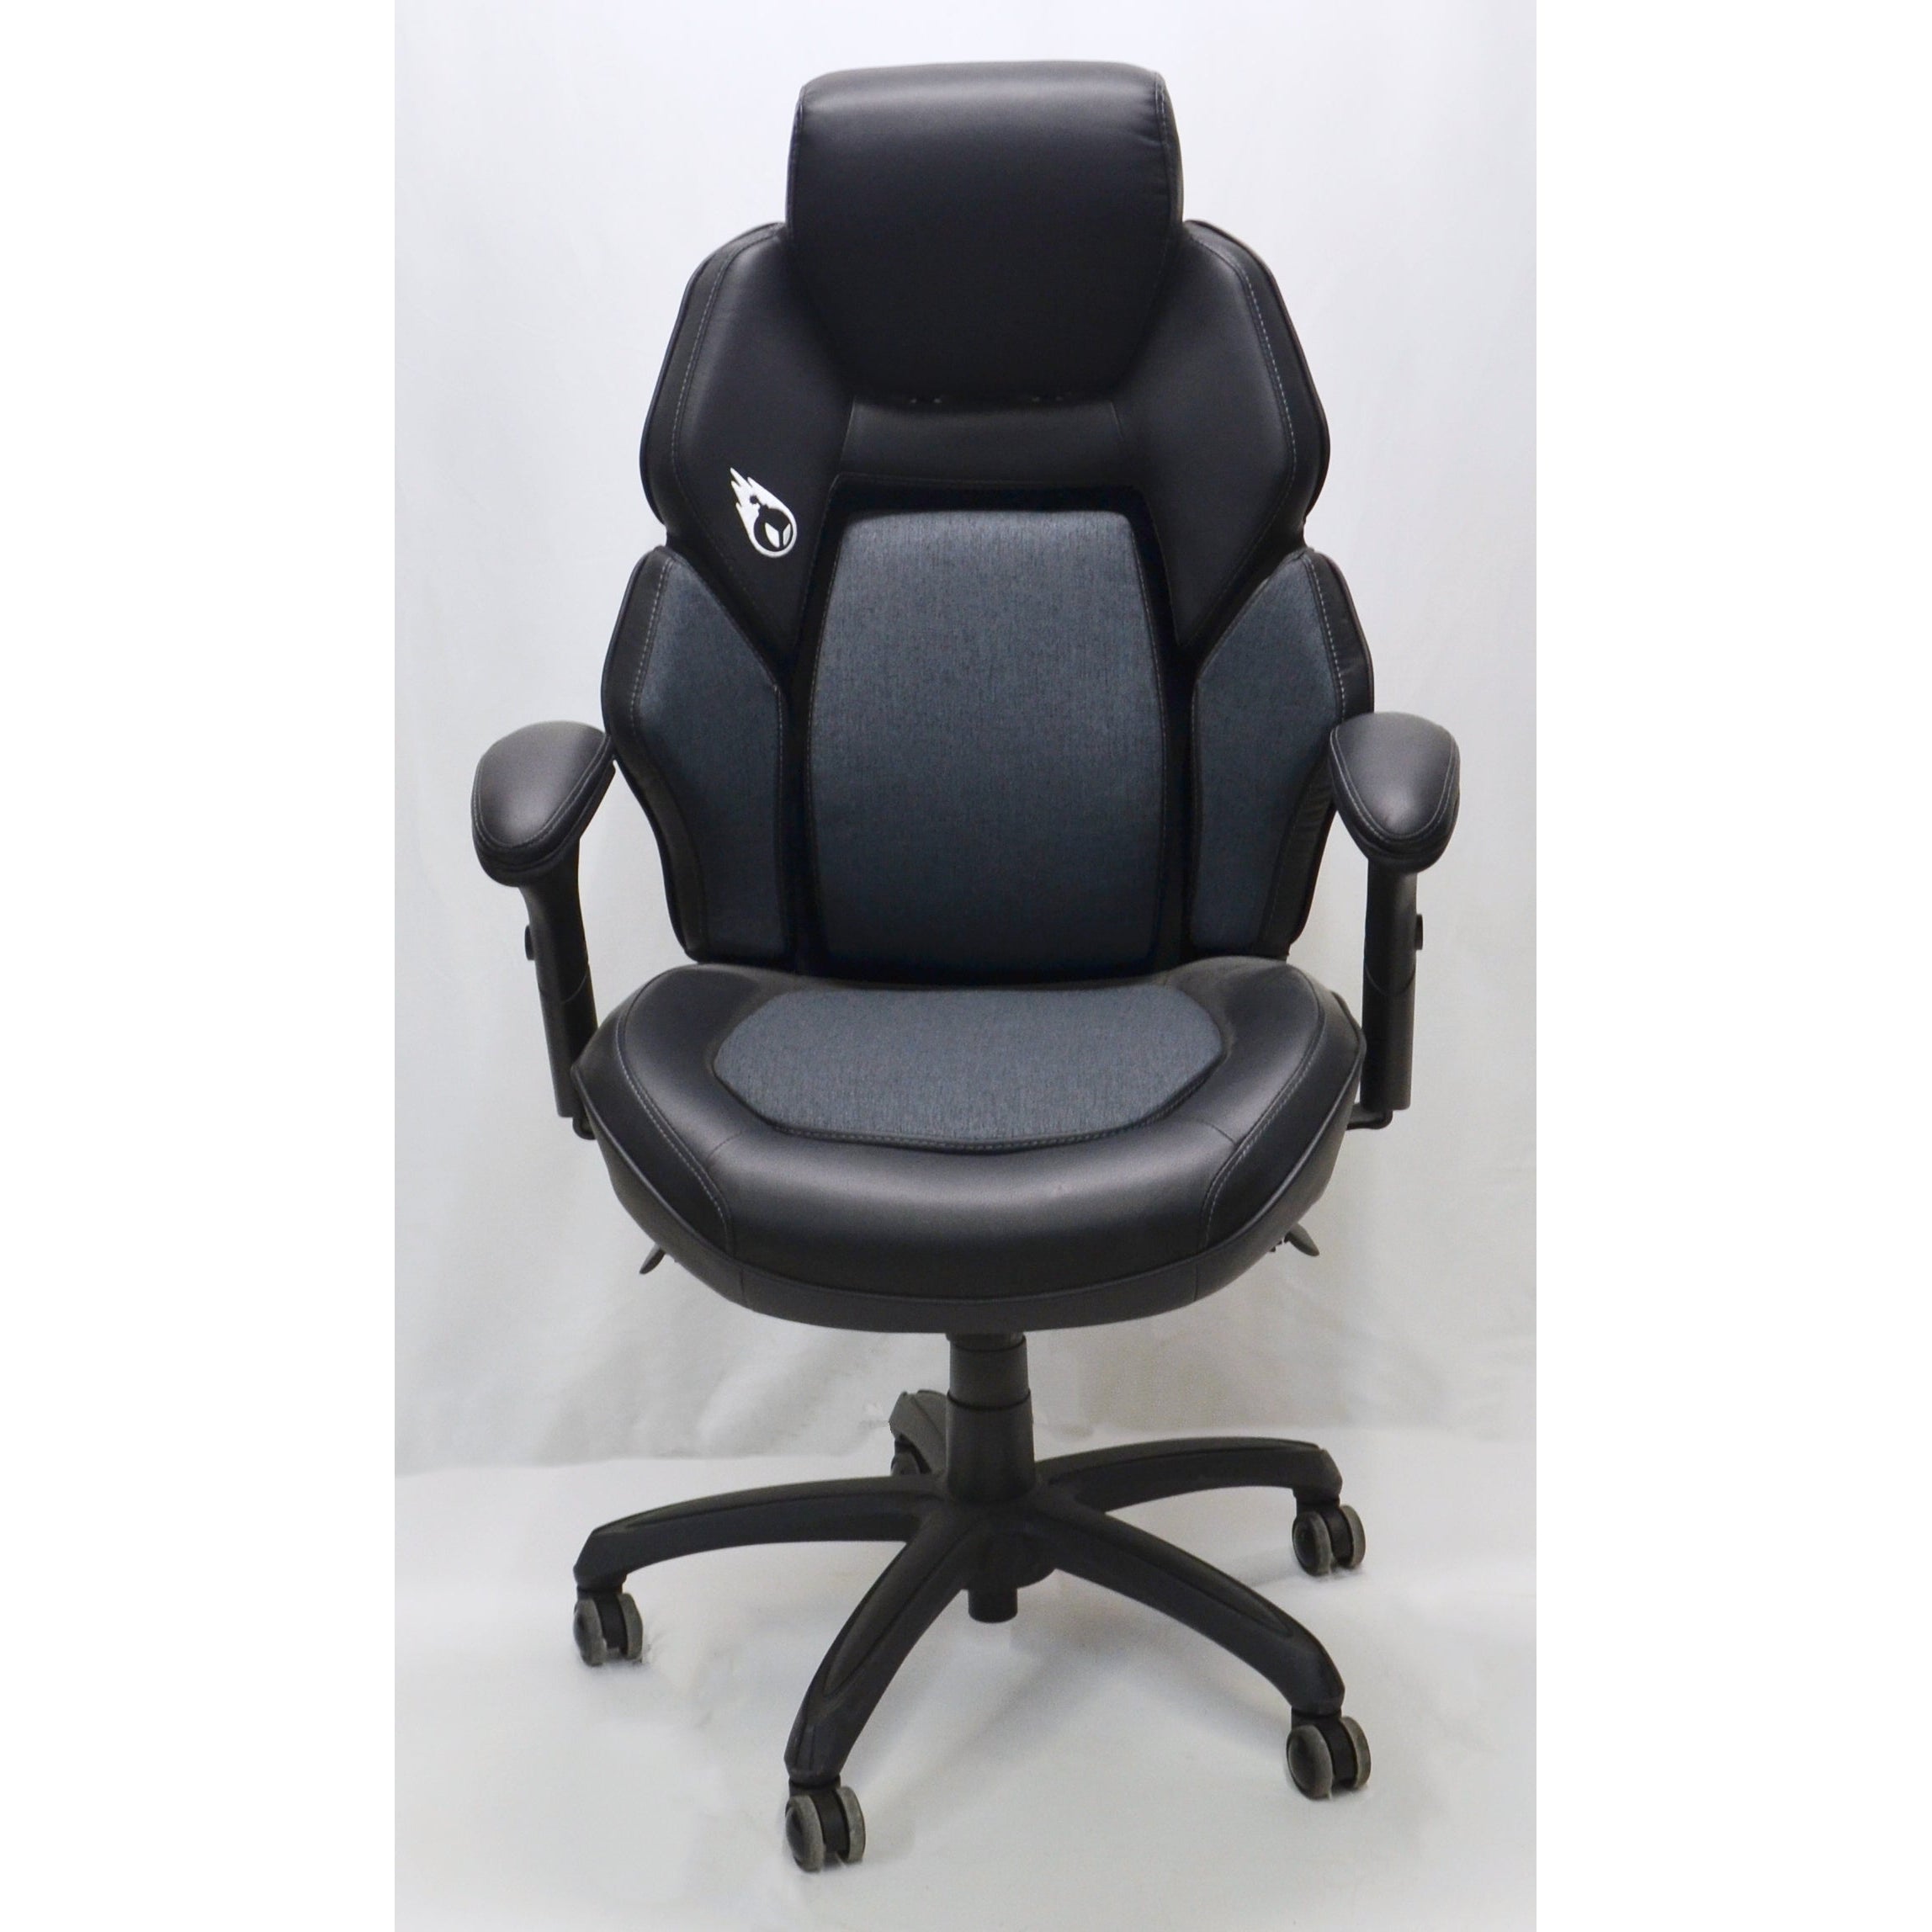 DPS Gaming 3D Insight Office Chair with Adjustable Headrest